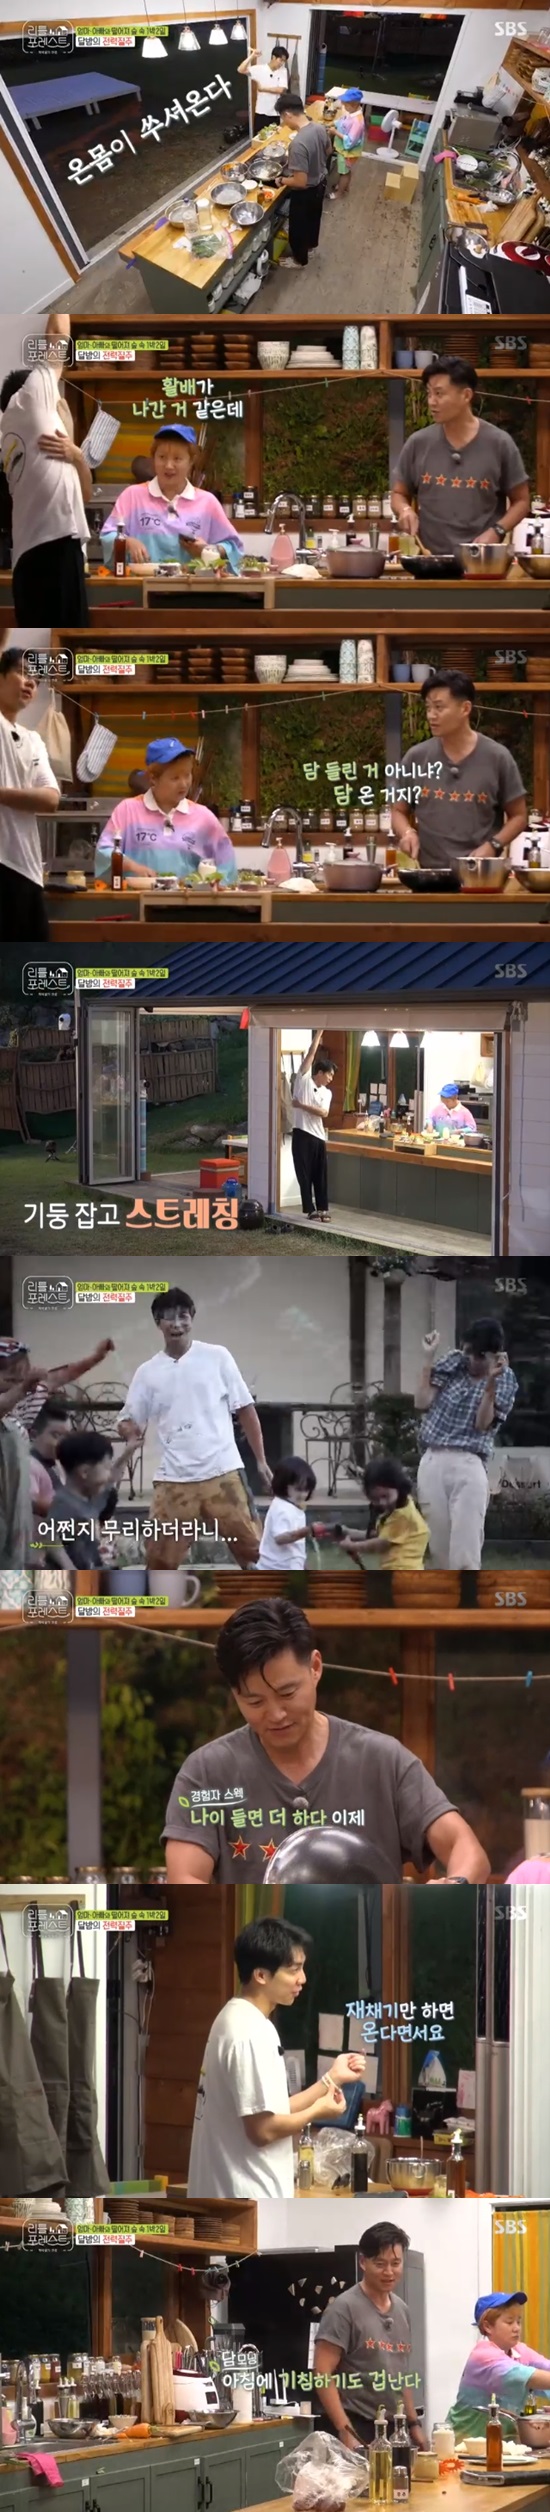 Lee Seo-jin told Experiences, worried about Lee Seung-gi.Lee Seo-jin was worried about Lee Seung-gis health on SBS Little Forest broadcast on August 27th.Lee Seo-jin decided to make a rice bowl and shrimp tofu Wanjatang with childrens rice, and first made a wanja and worried about I feel bad.Lee Seung-gi, who is next to Lee Seo-jin, started stretching, saying, It smells delicious.Lee Seung-gi complained of pain, saying, I think my right side, my bow, is out, thanks to my hard work with the children and making a cabin from the morning.Lee Seo-jin said, Is it a wall? Its a wall. More when you get older. The wall comes to Ocasional.Yoo Gyeong-sang